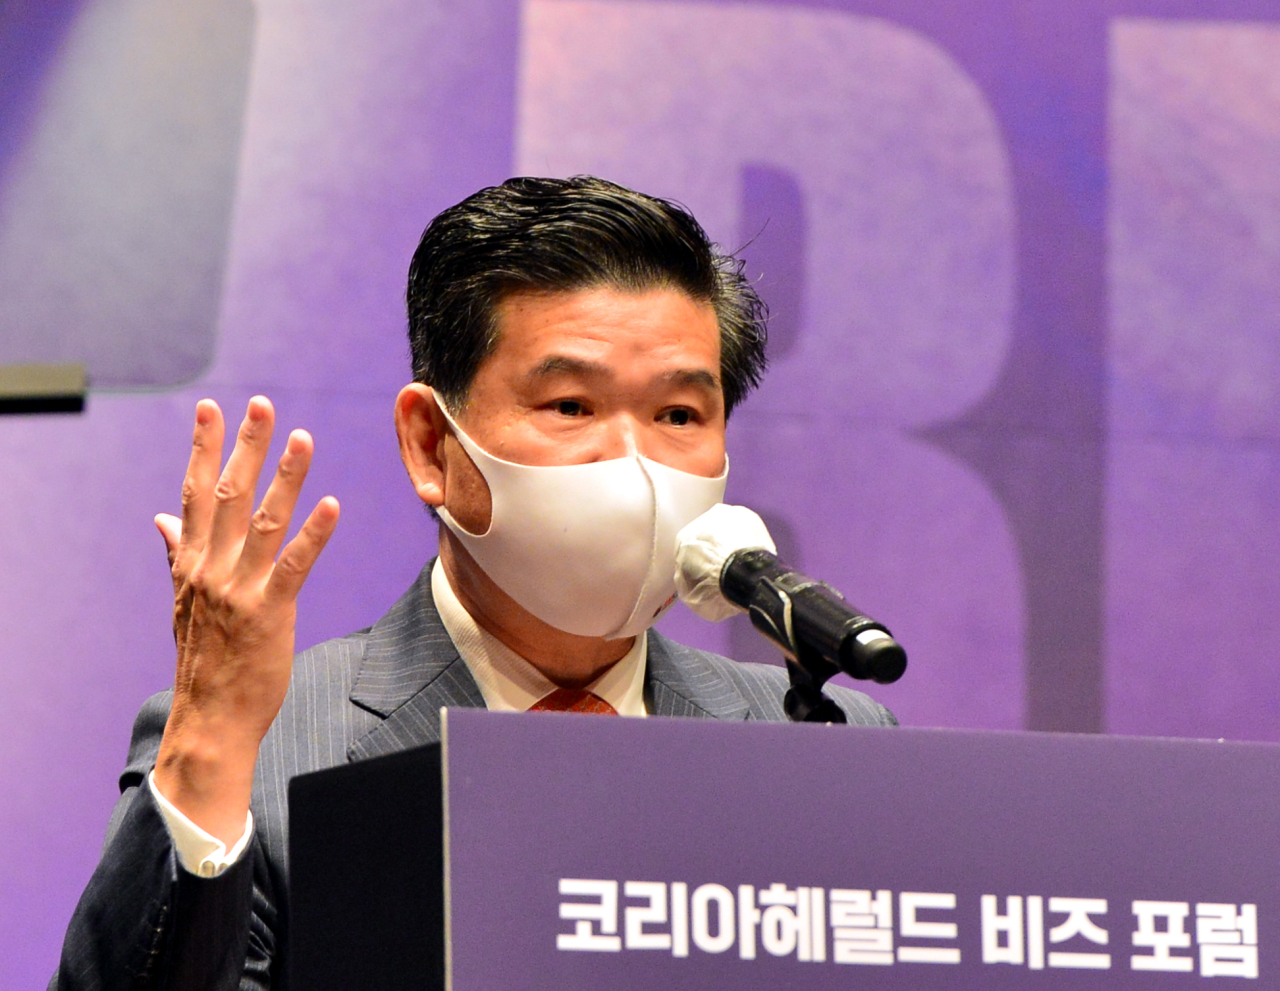 James Kim, chairman and chief executive officer of the American Chamber of Commerce in Korea, delivers his congratulatory speeches at The Korea Herald’s fourth annual business forum held at the Shilla Seoul, Tuesday. (Park Hyun-koo/The Korea Herald)